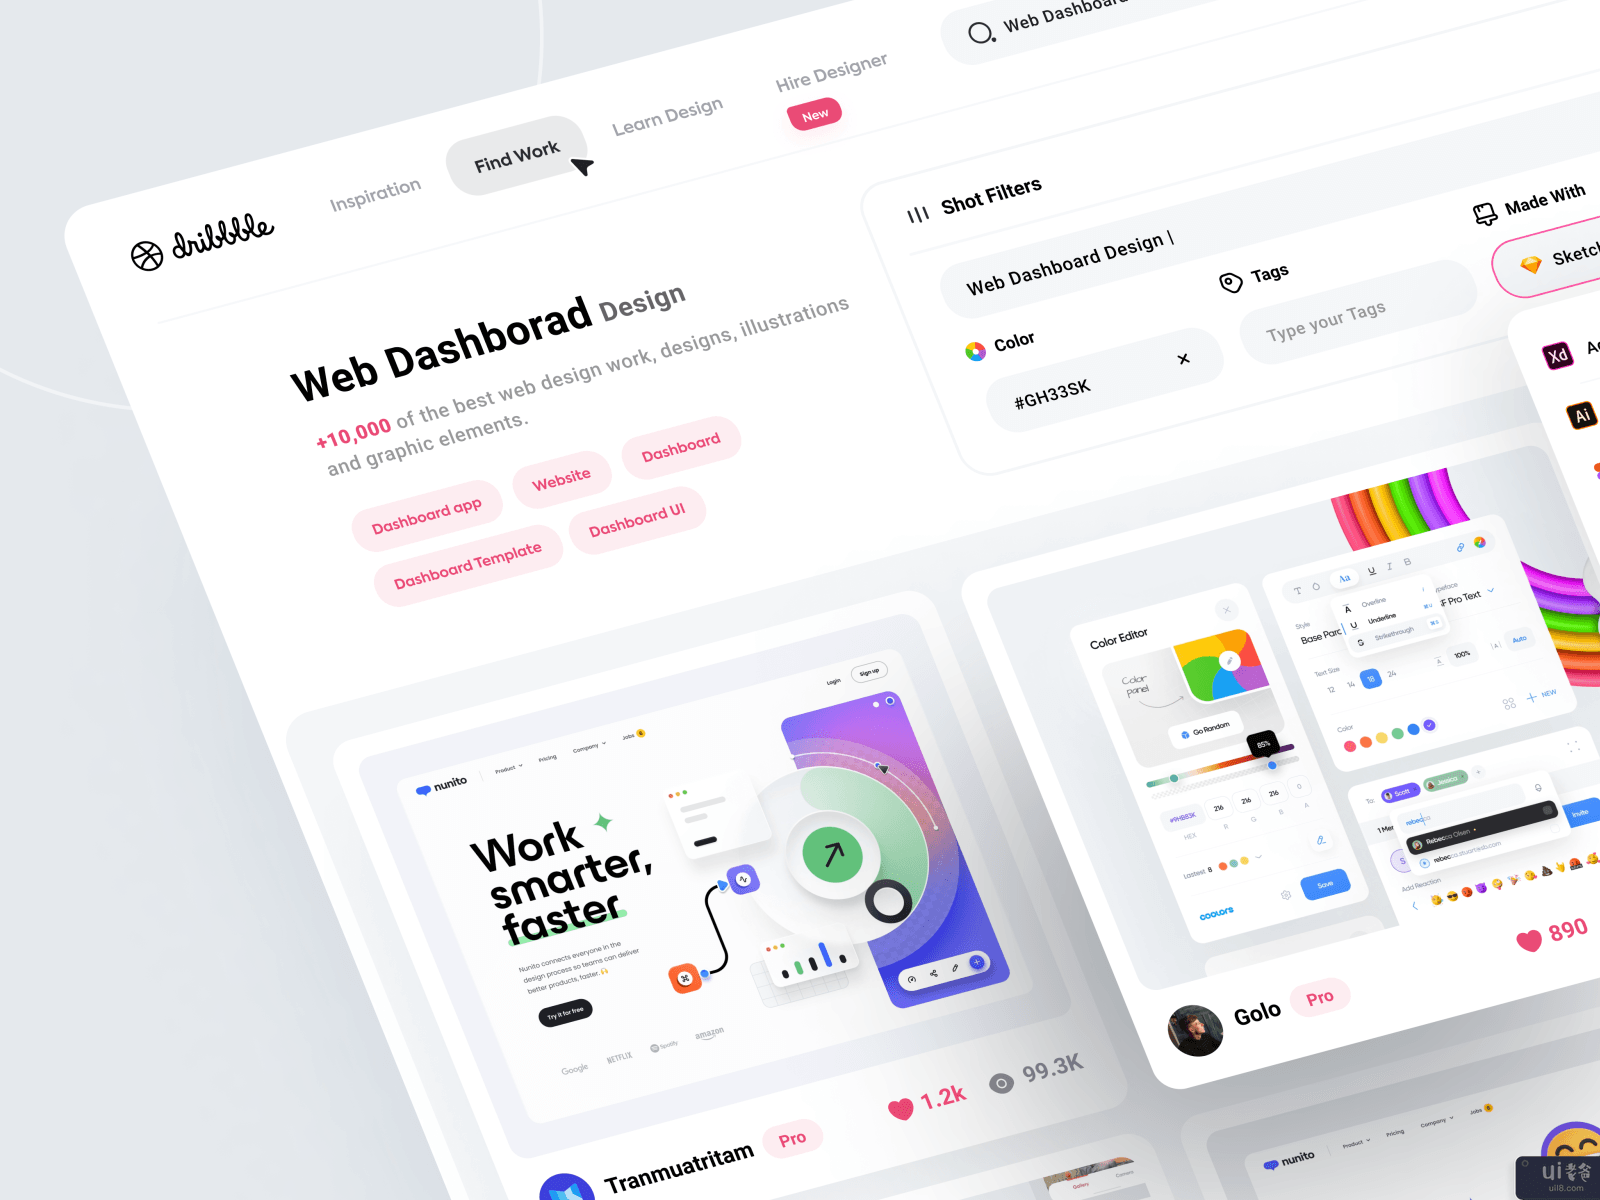 Dribbble重新设计 - 搜索页面(Dribbble Redesign - Search Page)插图2